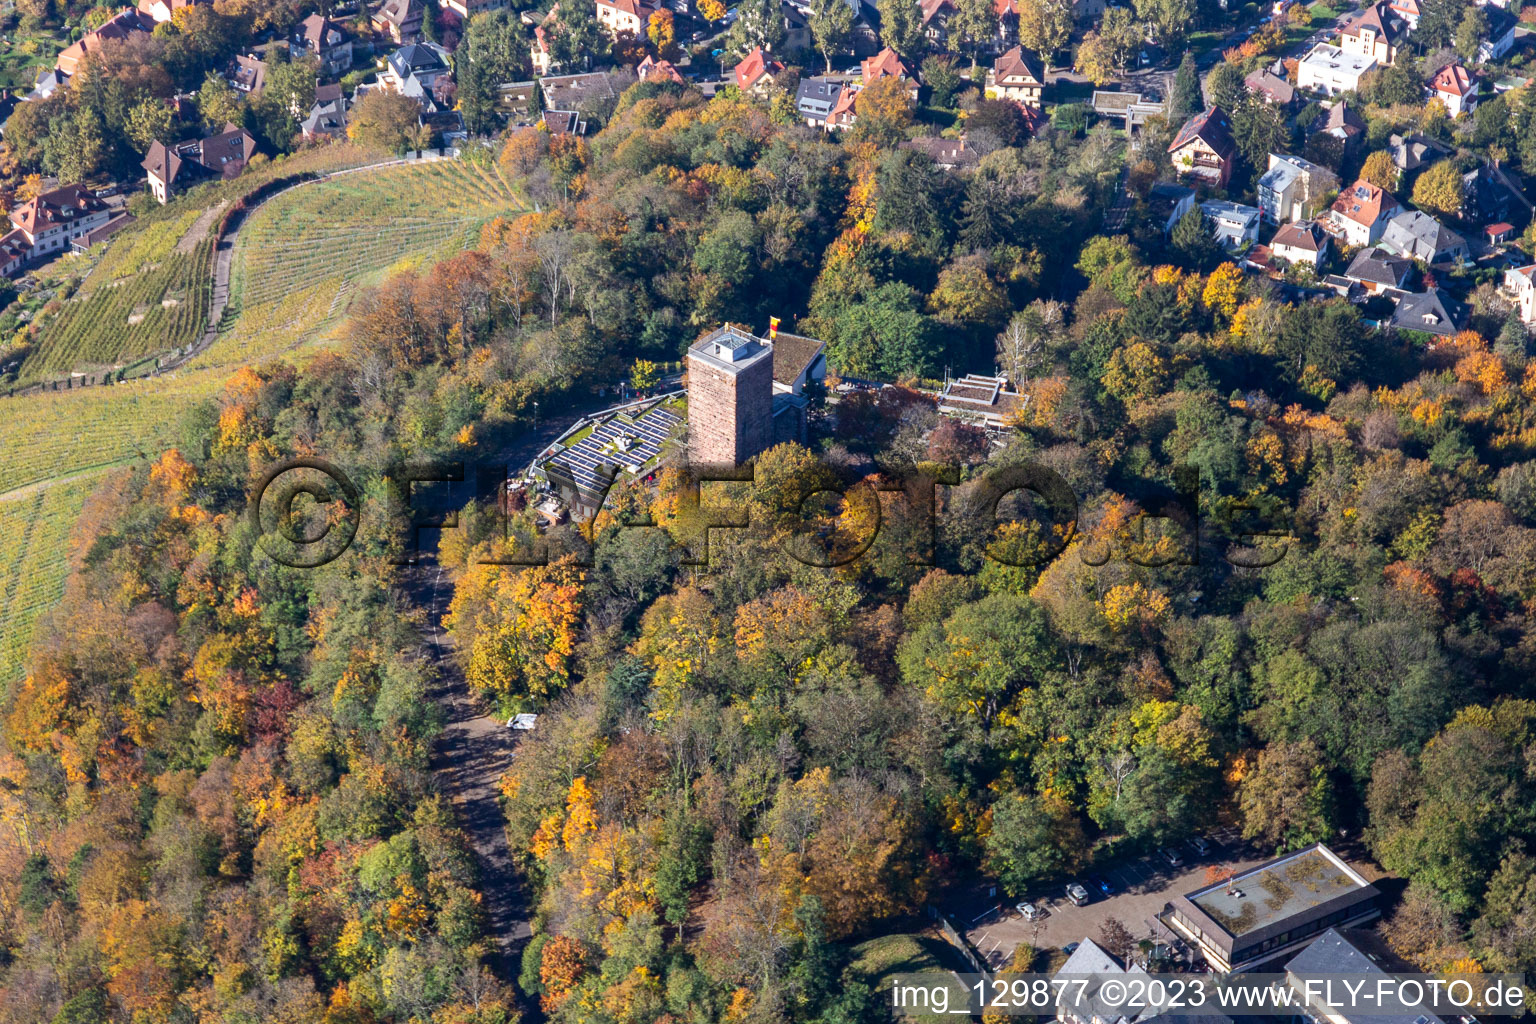 Tower Mountain in the district Durlach in Karlsruhe in the state Baden-Wuerttemberg, Germany